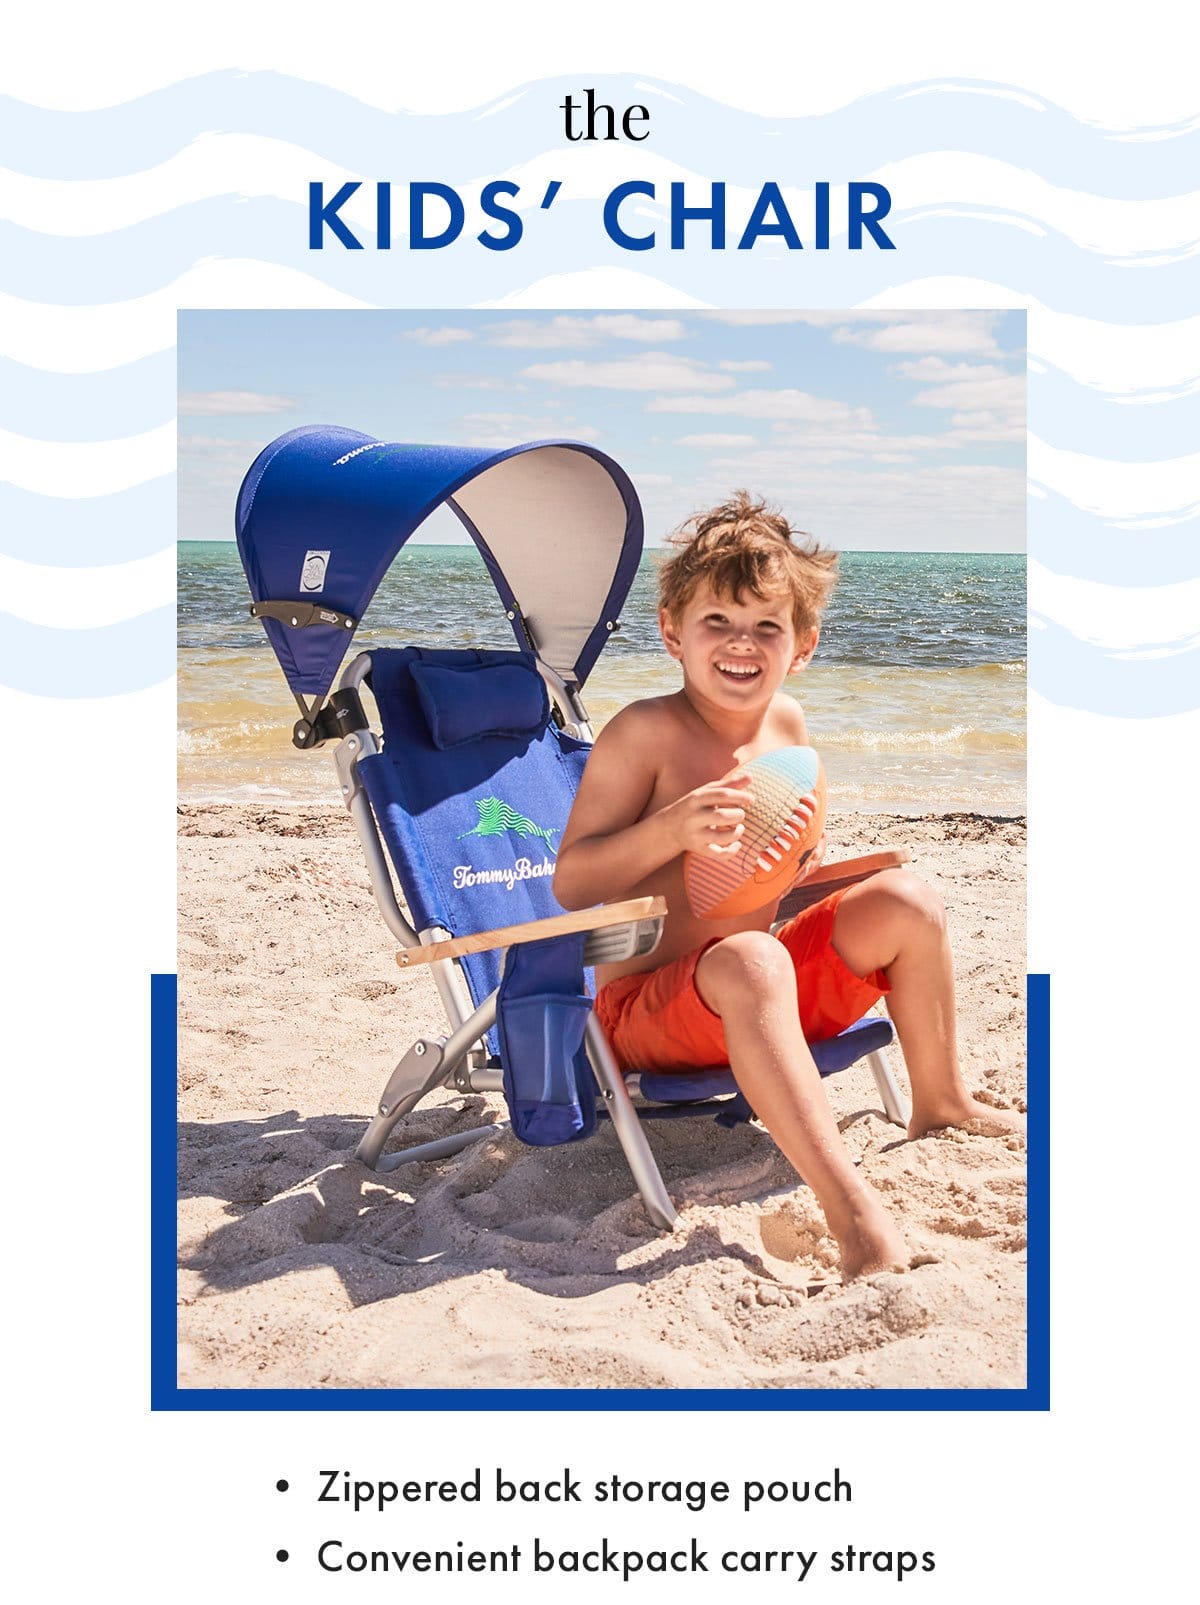 The Kid's Chair. Zippered back storage pouch. Convenient backpack carry straps.